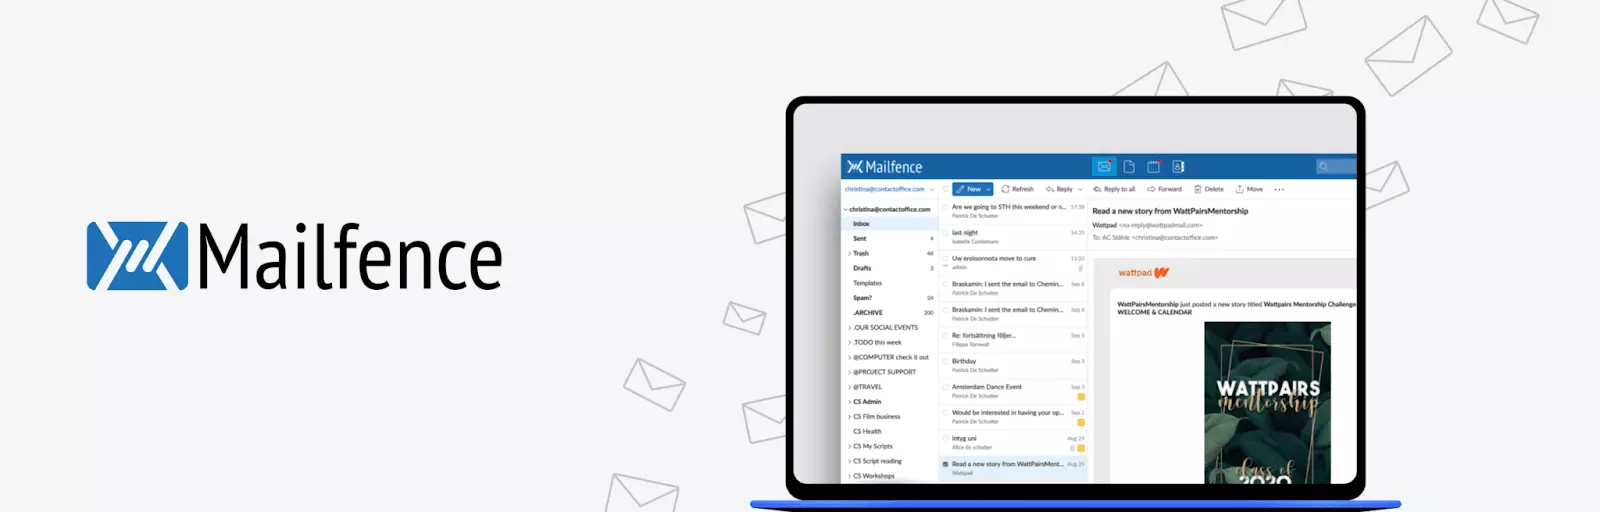 Mailfence - Fastmail Alternative